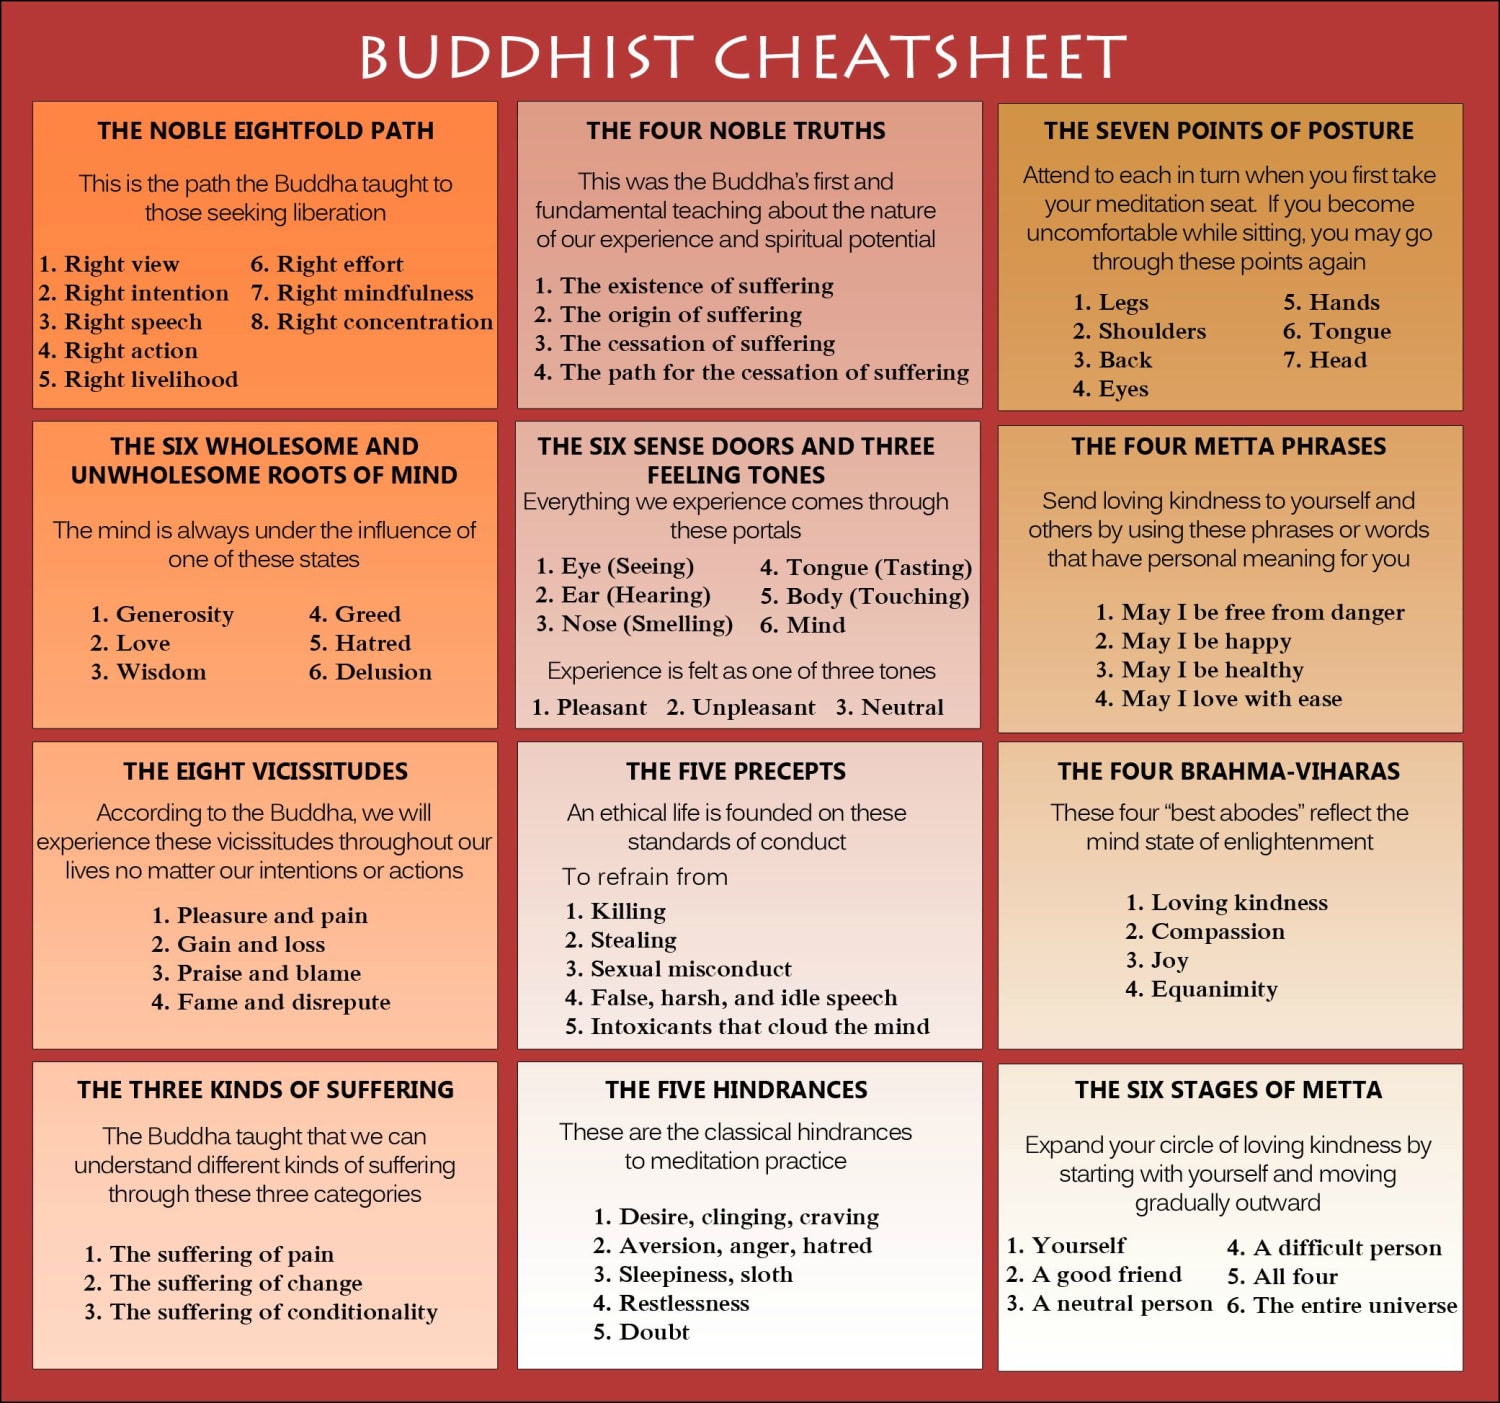 This cheat sheet is linked from the FAQ ... are there any elements that you feel are missing? Rebirth? Karma? ...?